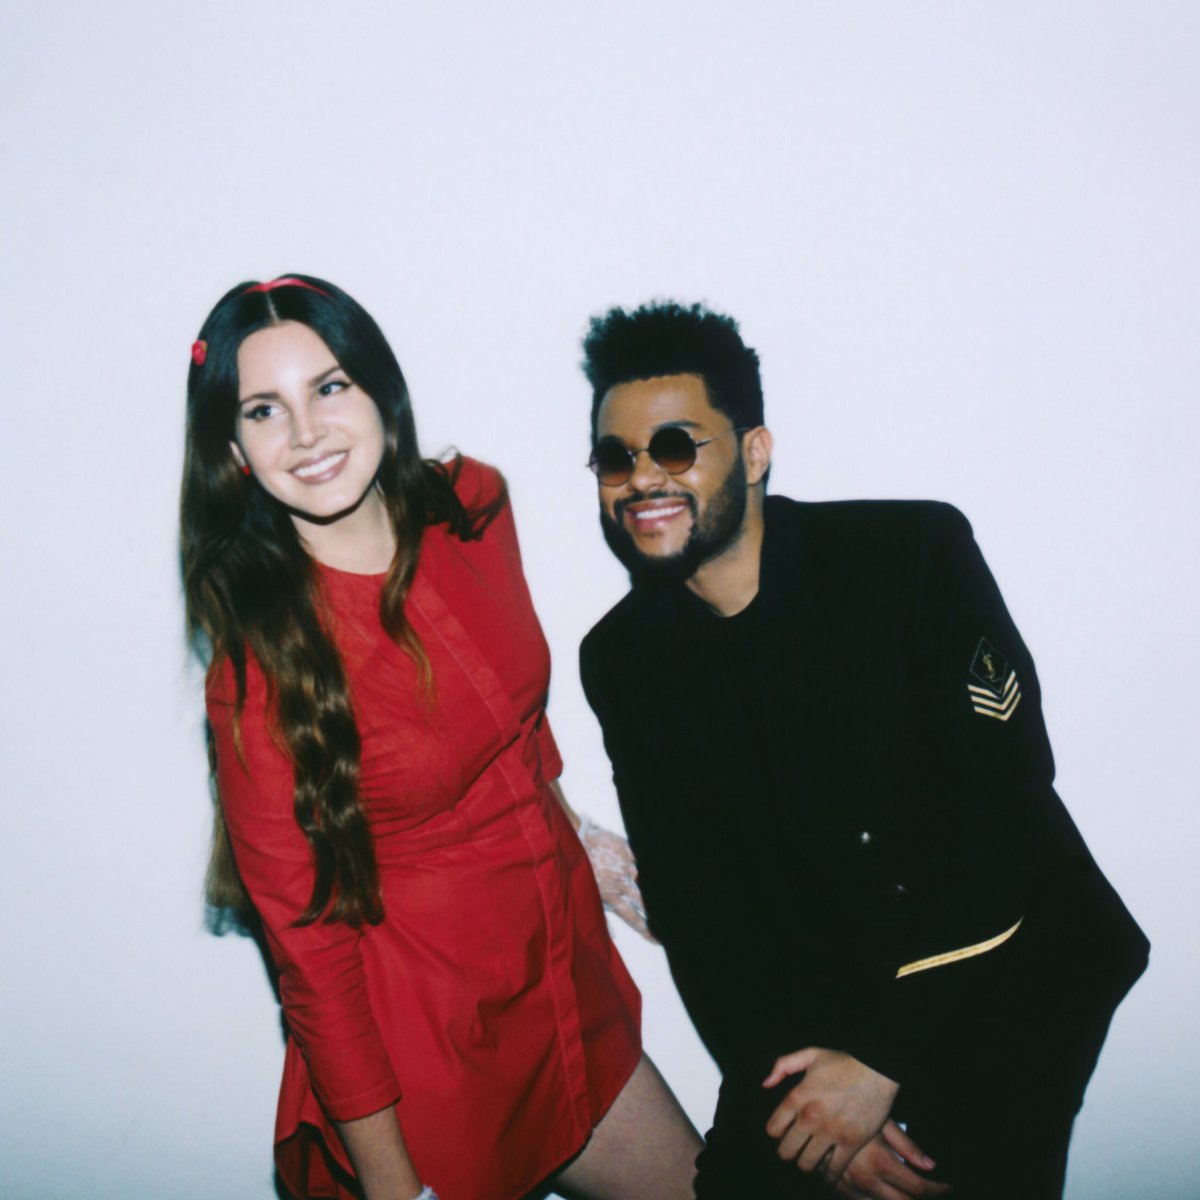 “Stargirl Interlude” by The Weeknd & Lana Del Rey has now surpassed 1 BILLION streams on Spotify.

— It's Lana's third song to achieve this milestone and the first interlude in Spotify history to do so.